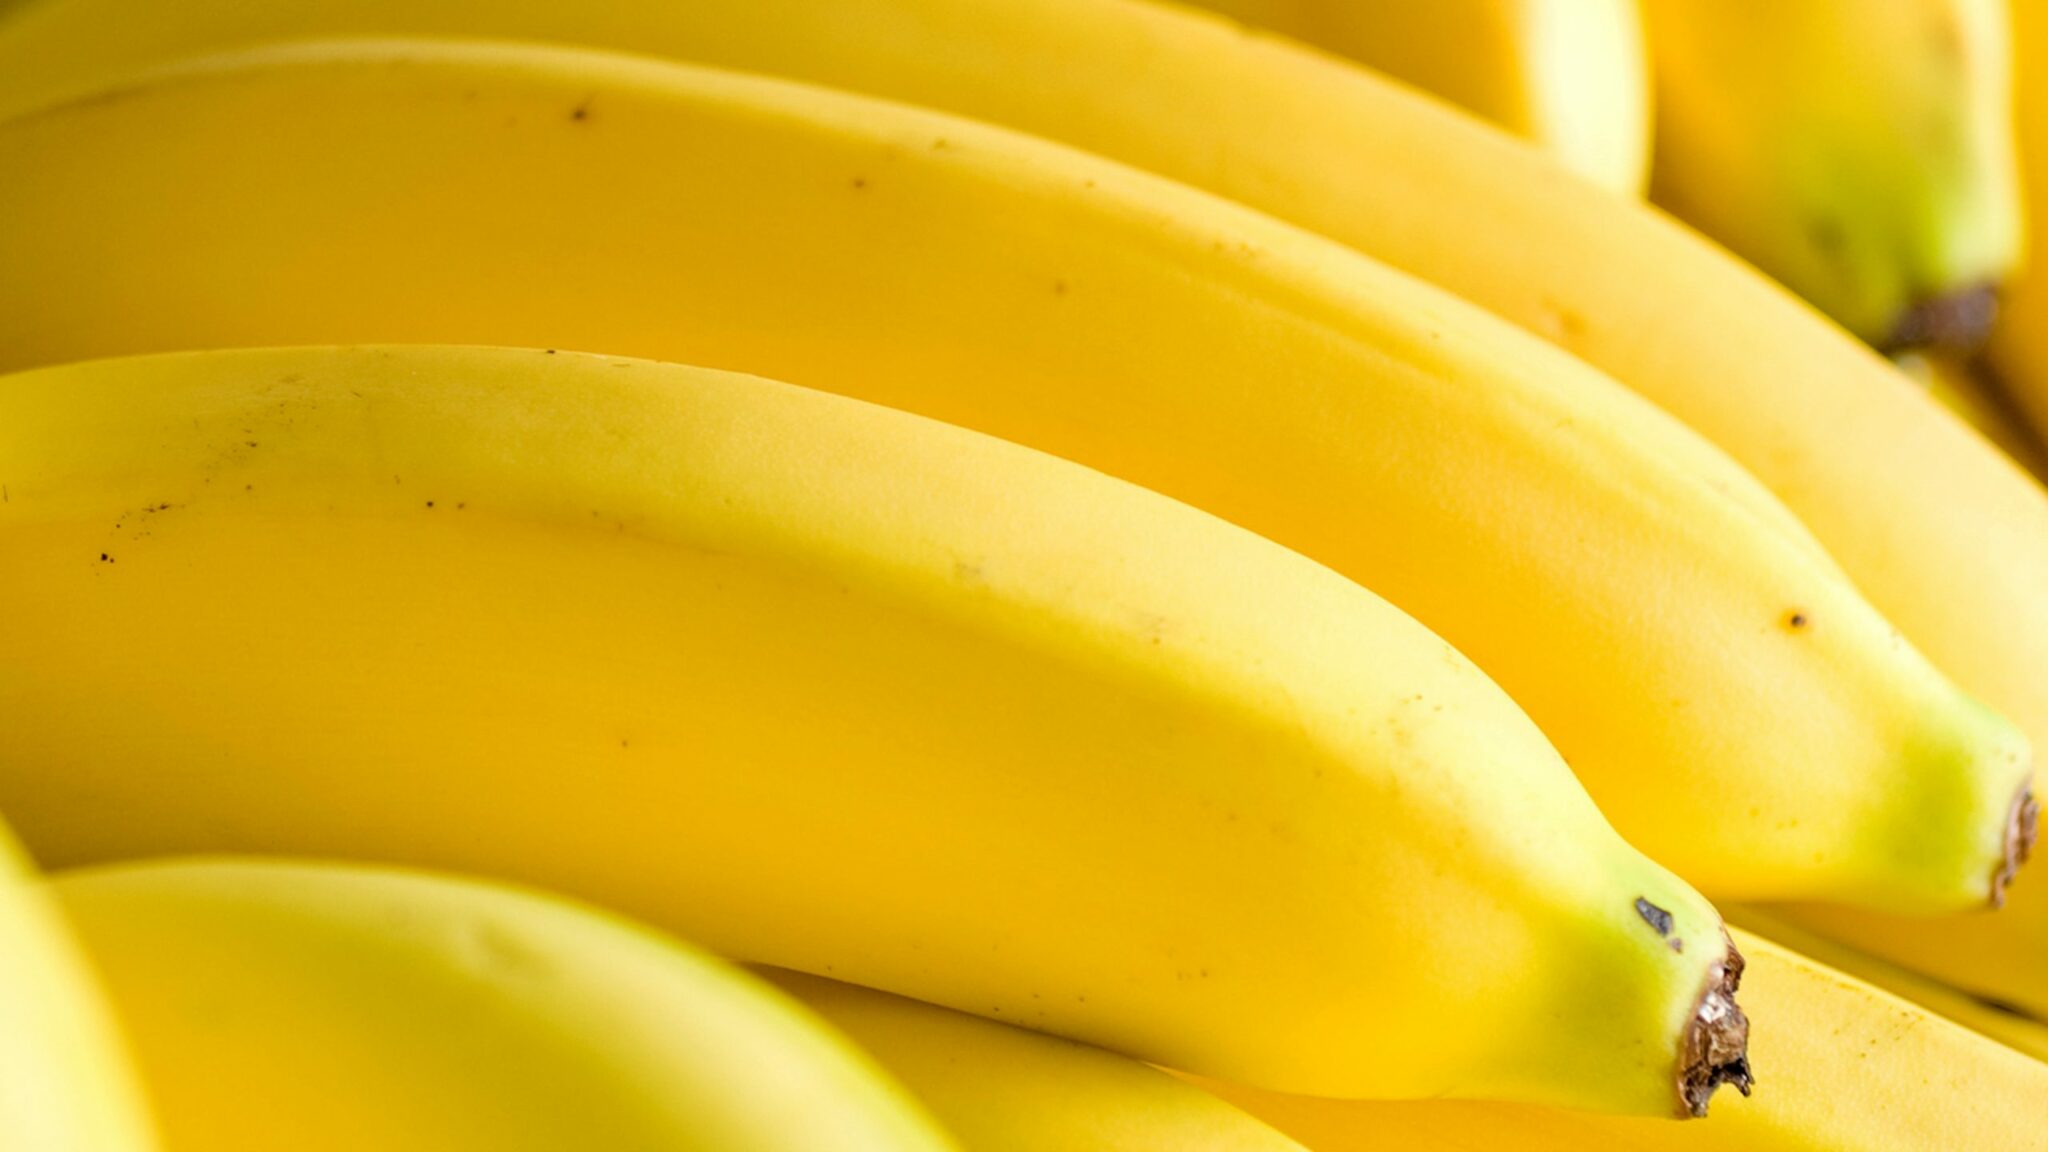 how does temperature affect ripening bananas